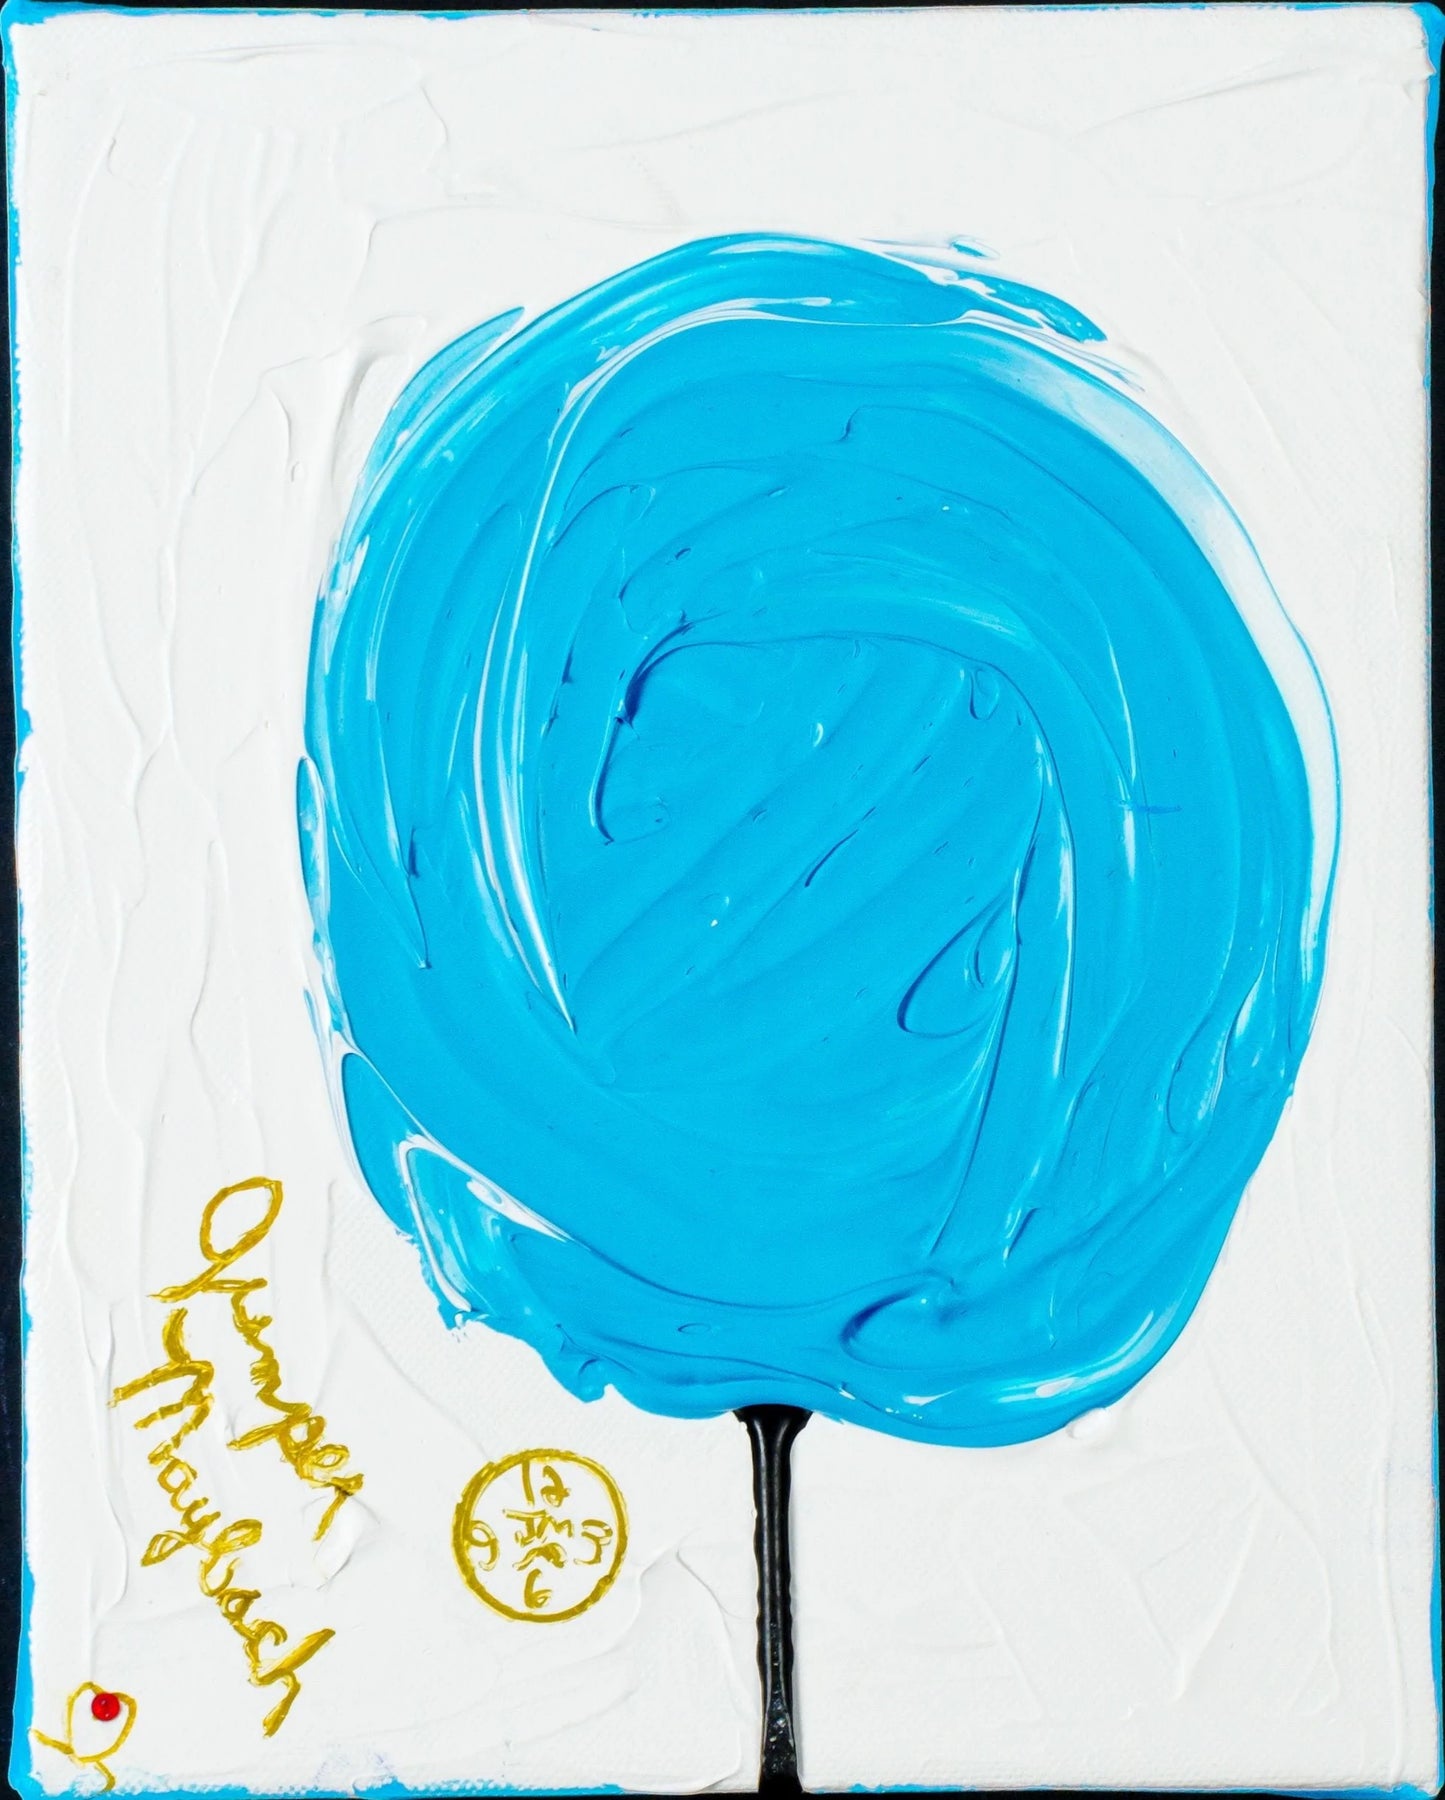 Blue Cotton Candy by Jumper Maybach®
From the Cotton Candy Series
Blue and Delicious 
8" x 10"
Acrylic mixed media on canvas 2011

Do you own a Jumper Maybach, yet? Blue Cotton Candy        PNTArtworkJumper MaybachJumper Maybach